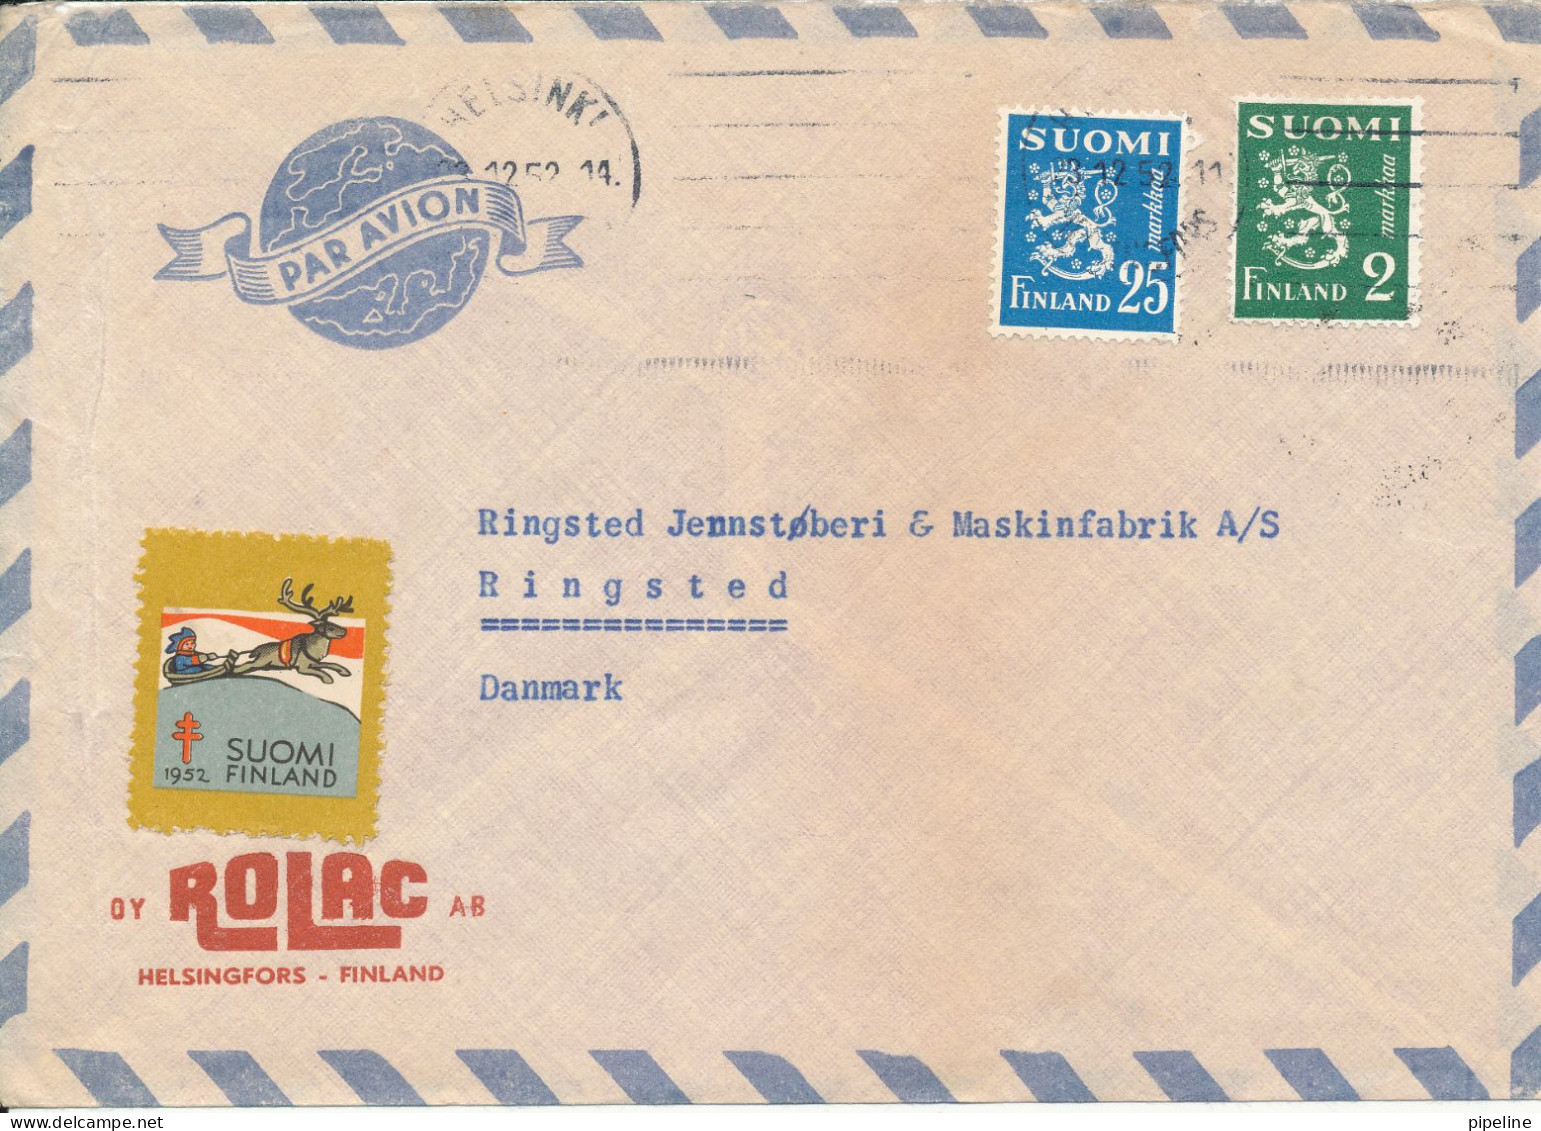 Finland Air Mail Cover Sent To Denmark 23-12-1952 Lion Stamps + Christmas Seal - Covers & Documents